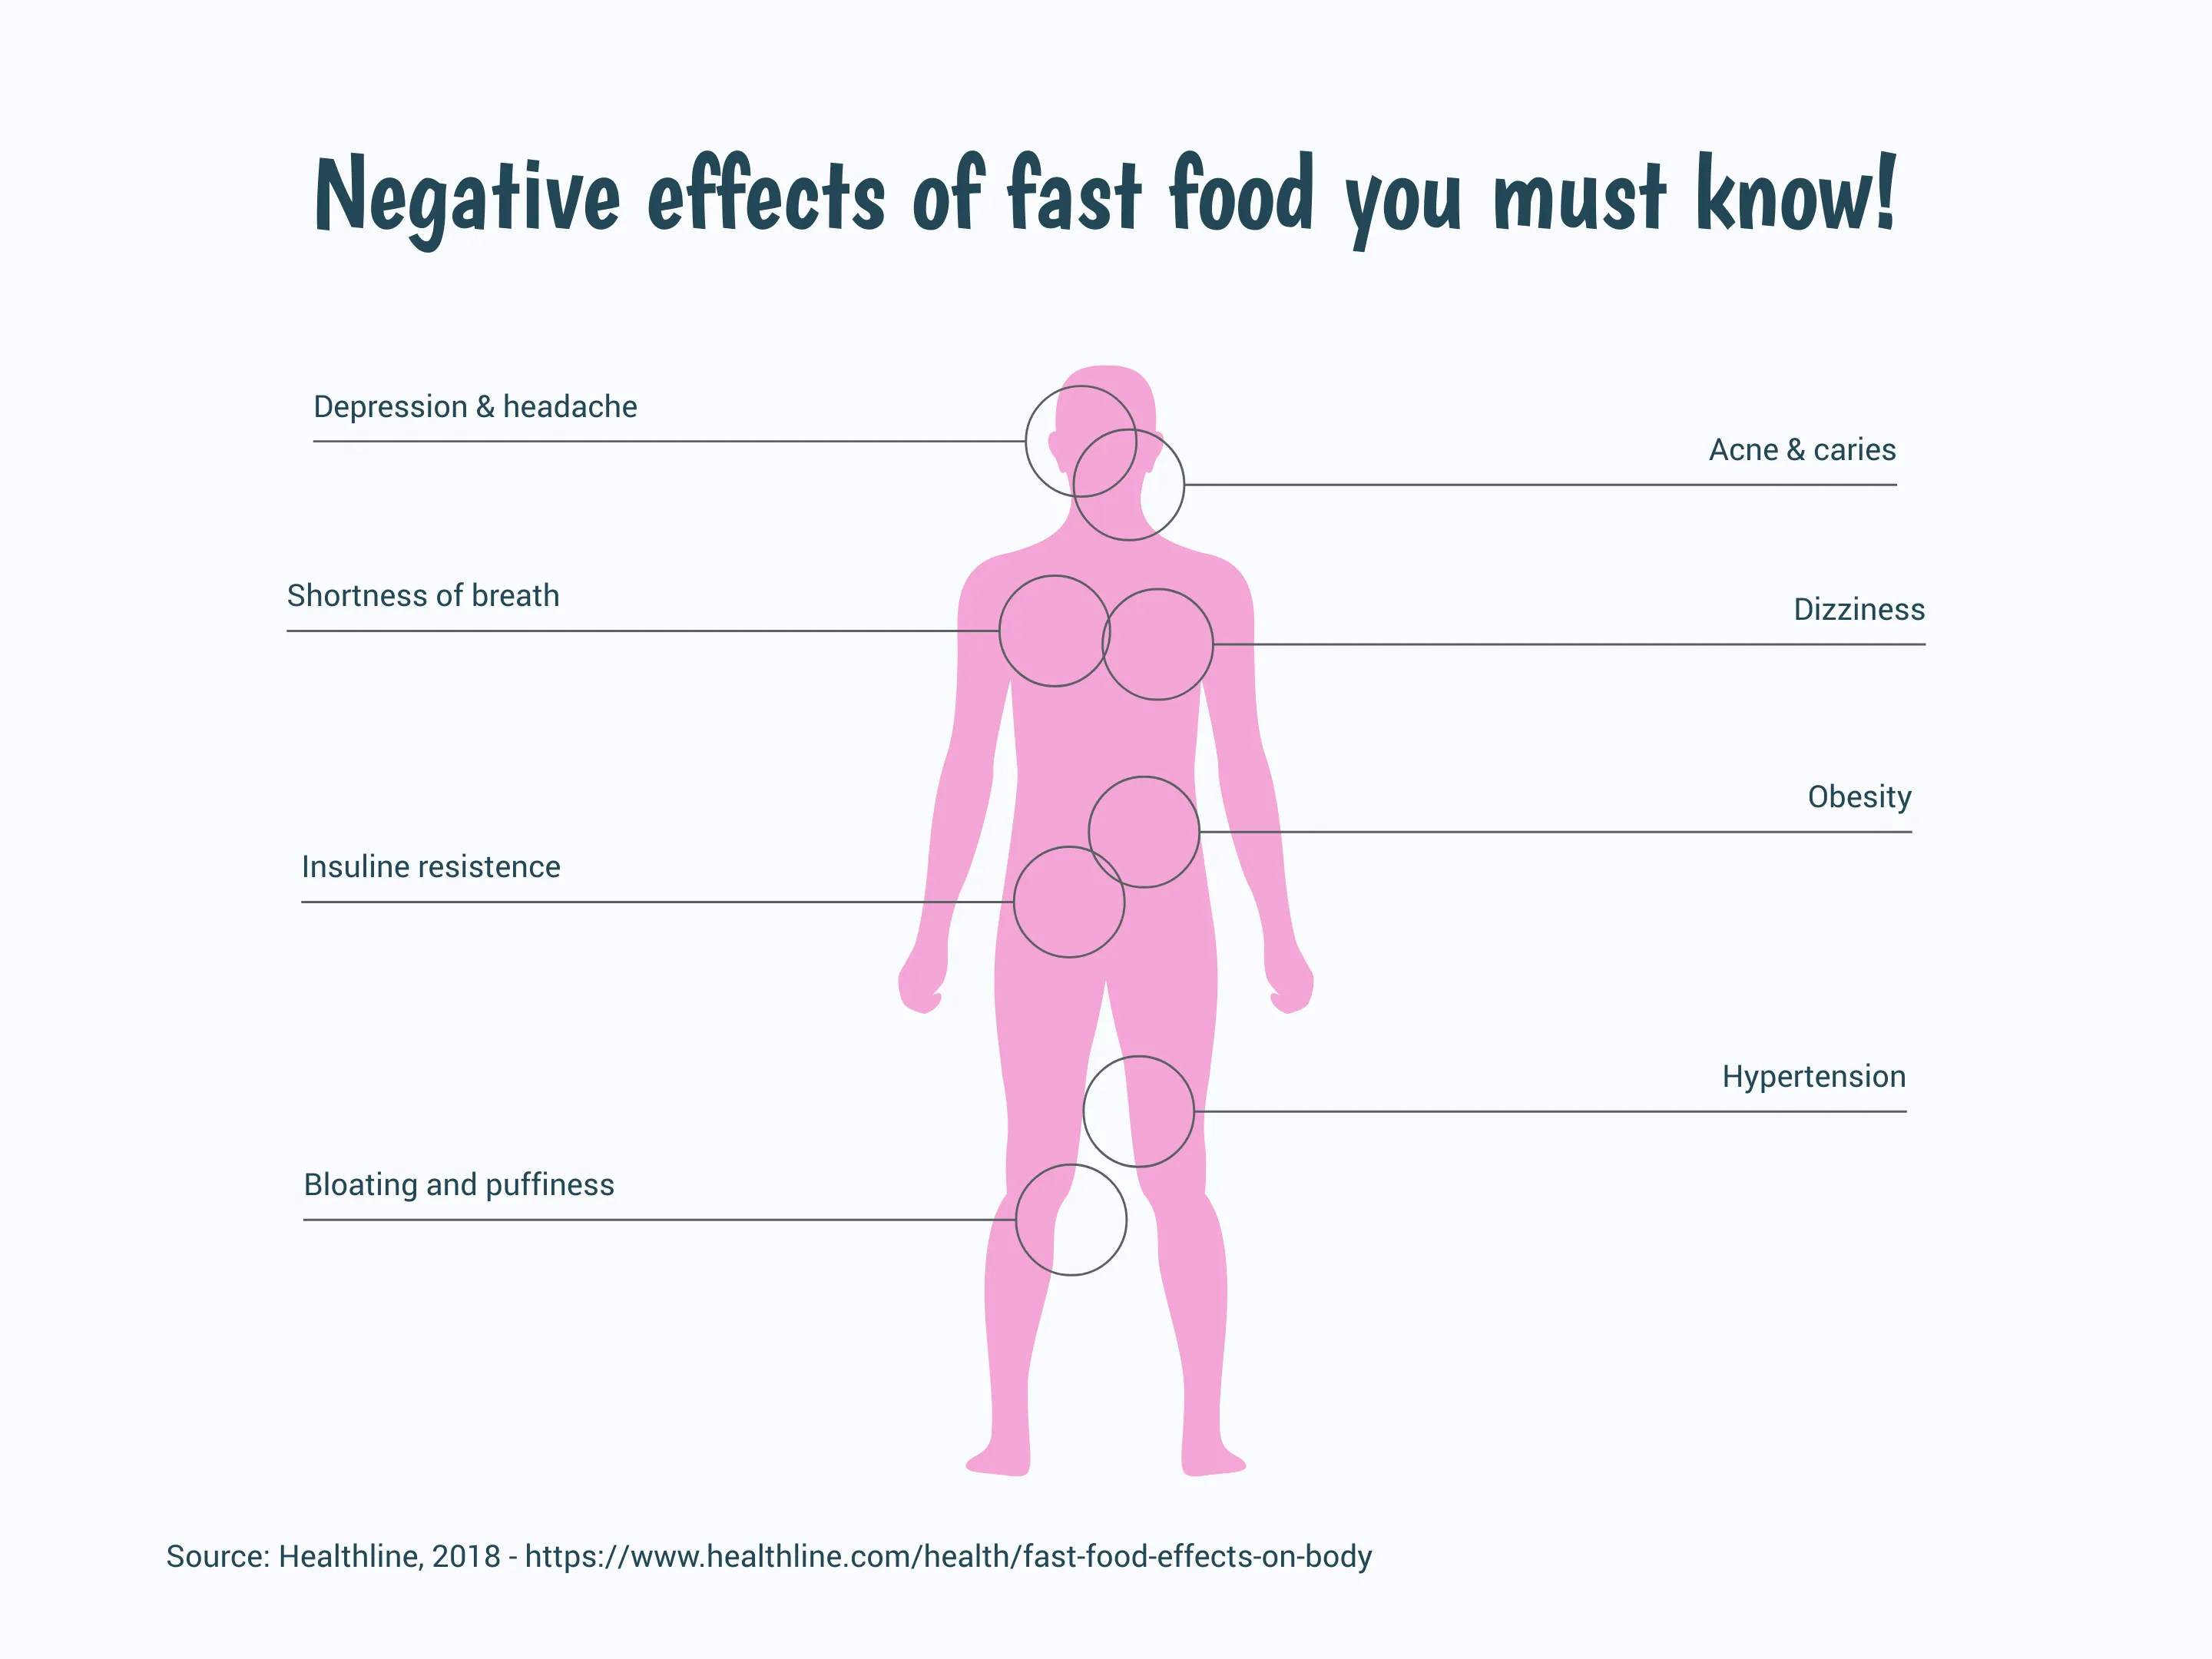 Negative effects of fast food you must know!